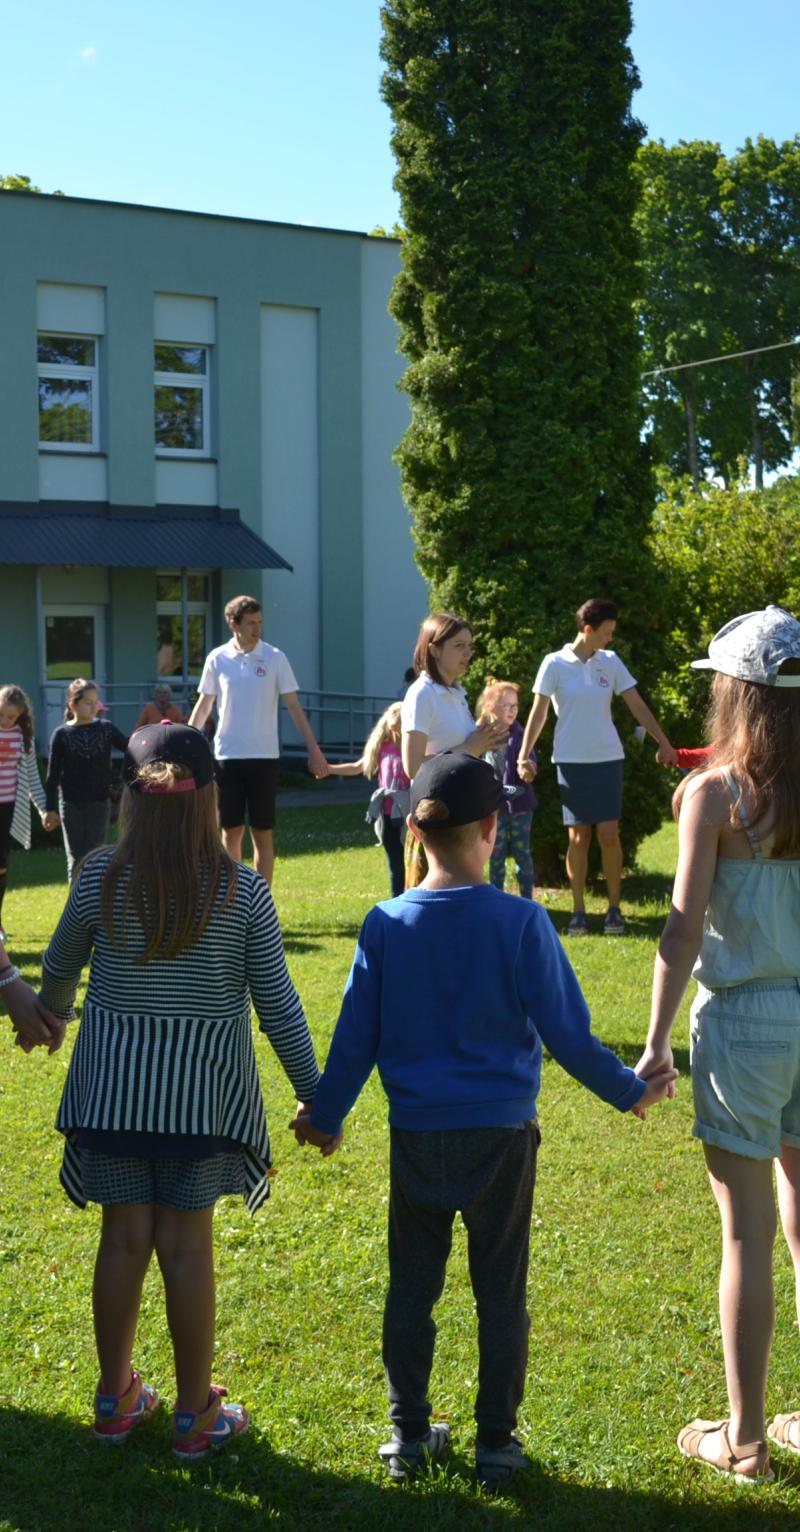 Educators and students are standing side-by-side in a giant circle holding hands. They are outside on a sunny day in green grass. There is a building with many windows on the left and trees on the right in the background. The people are all wearing summer clothes with a few wearing caps.